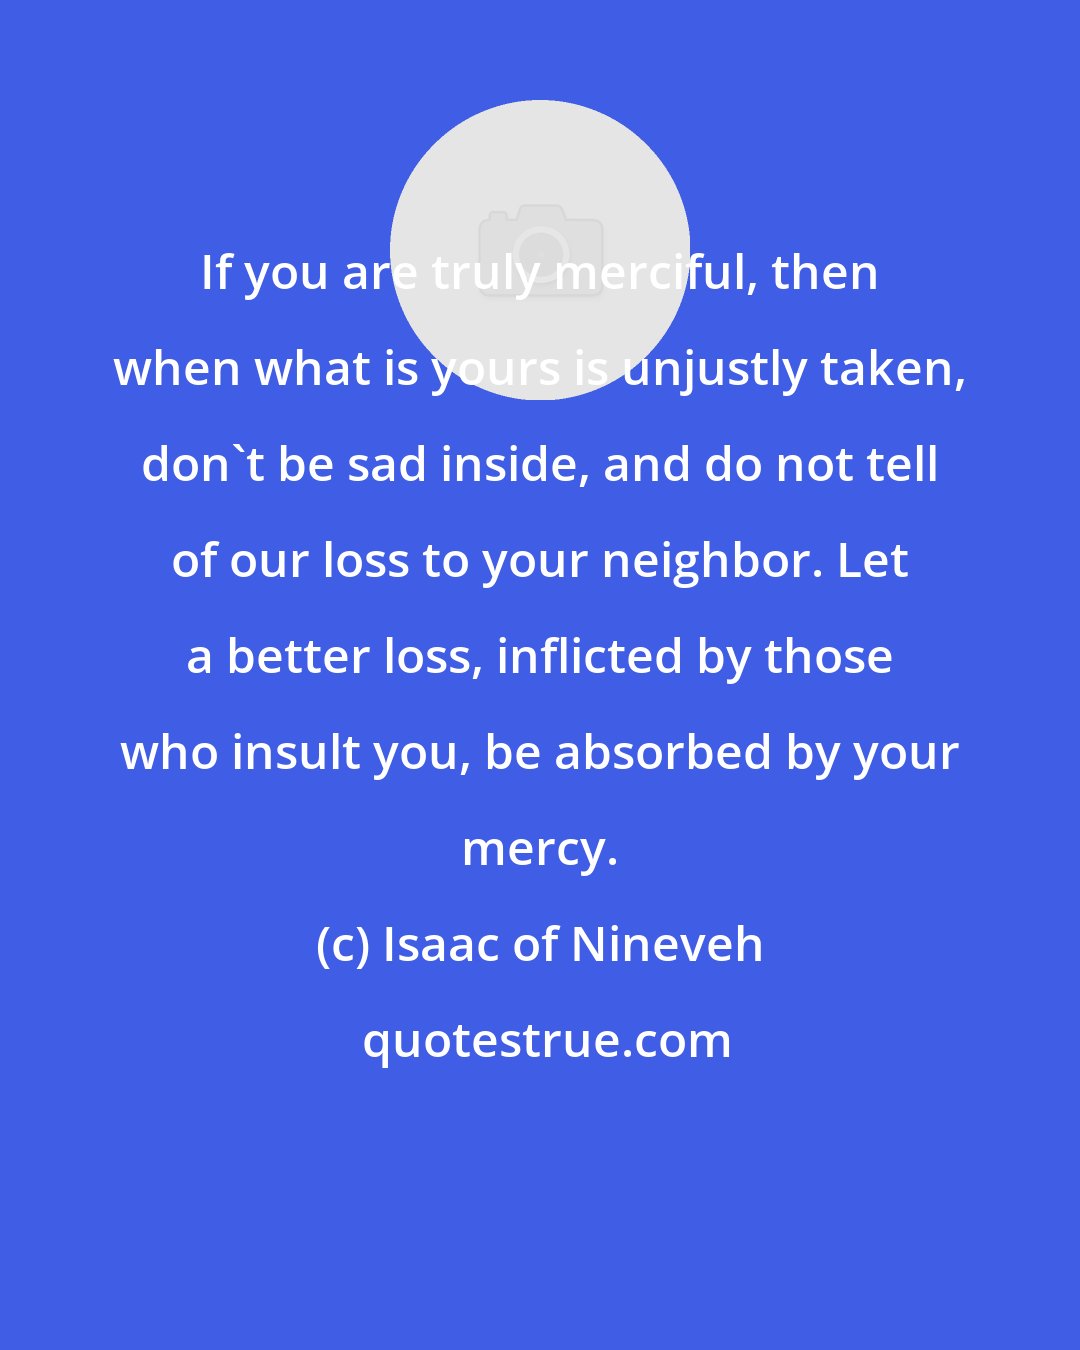 Isaac of Nineveh: If you are truly merciful, then when what is yours is unjustly taken, don't be sad inside, and do not tell of our loss to your neighbor. Let a better loss, inflicted by those who insult you, be absorbed by your mercy.